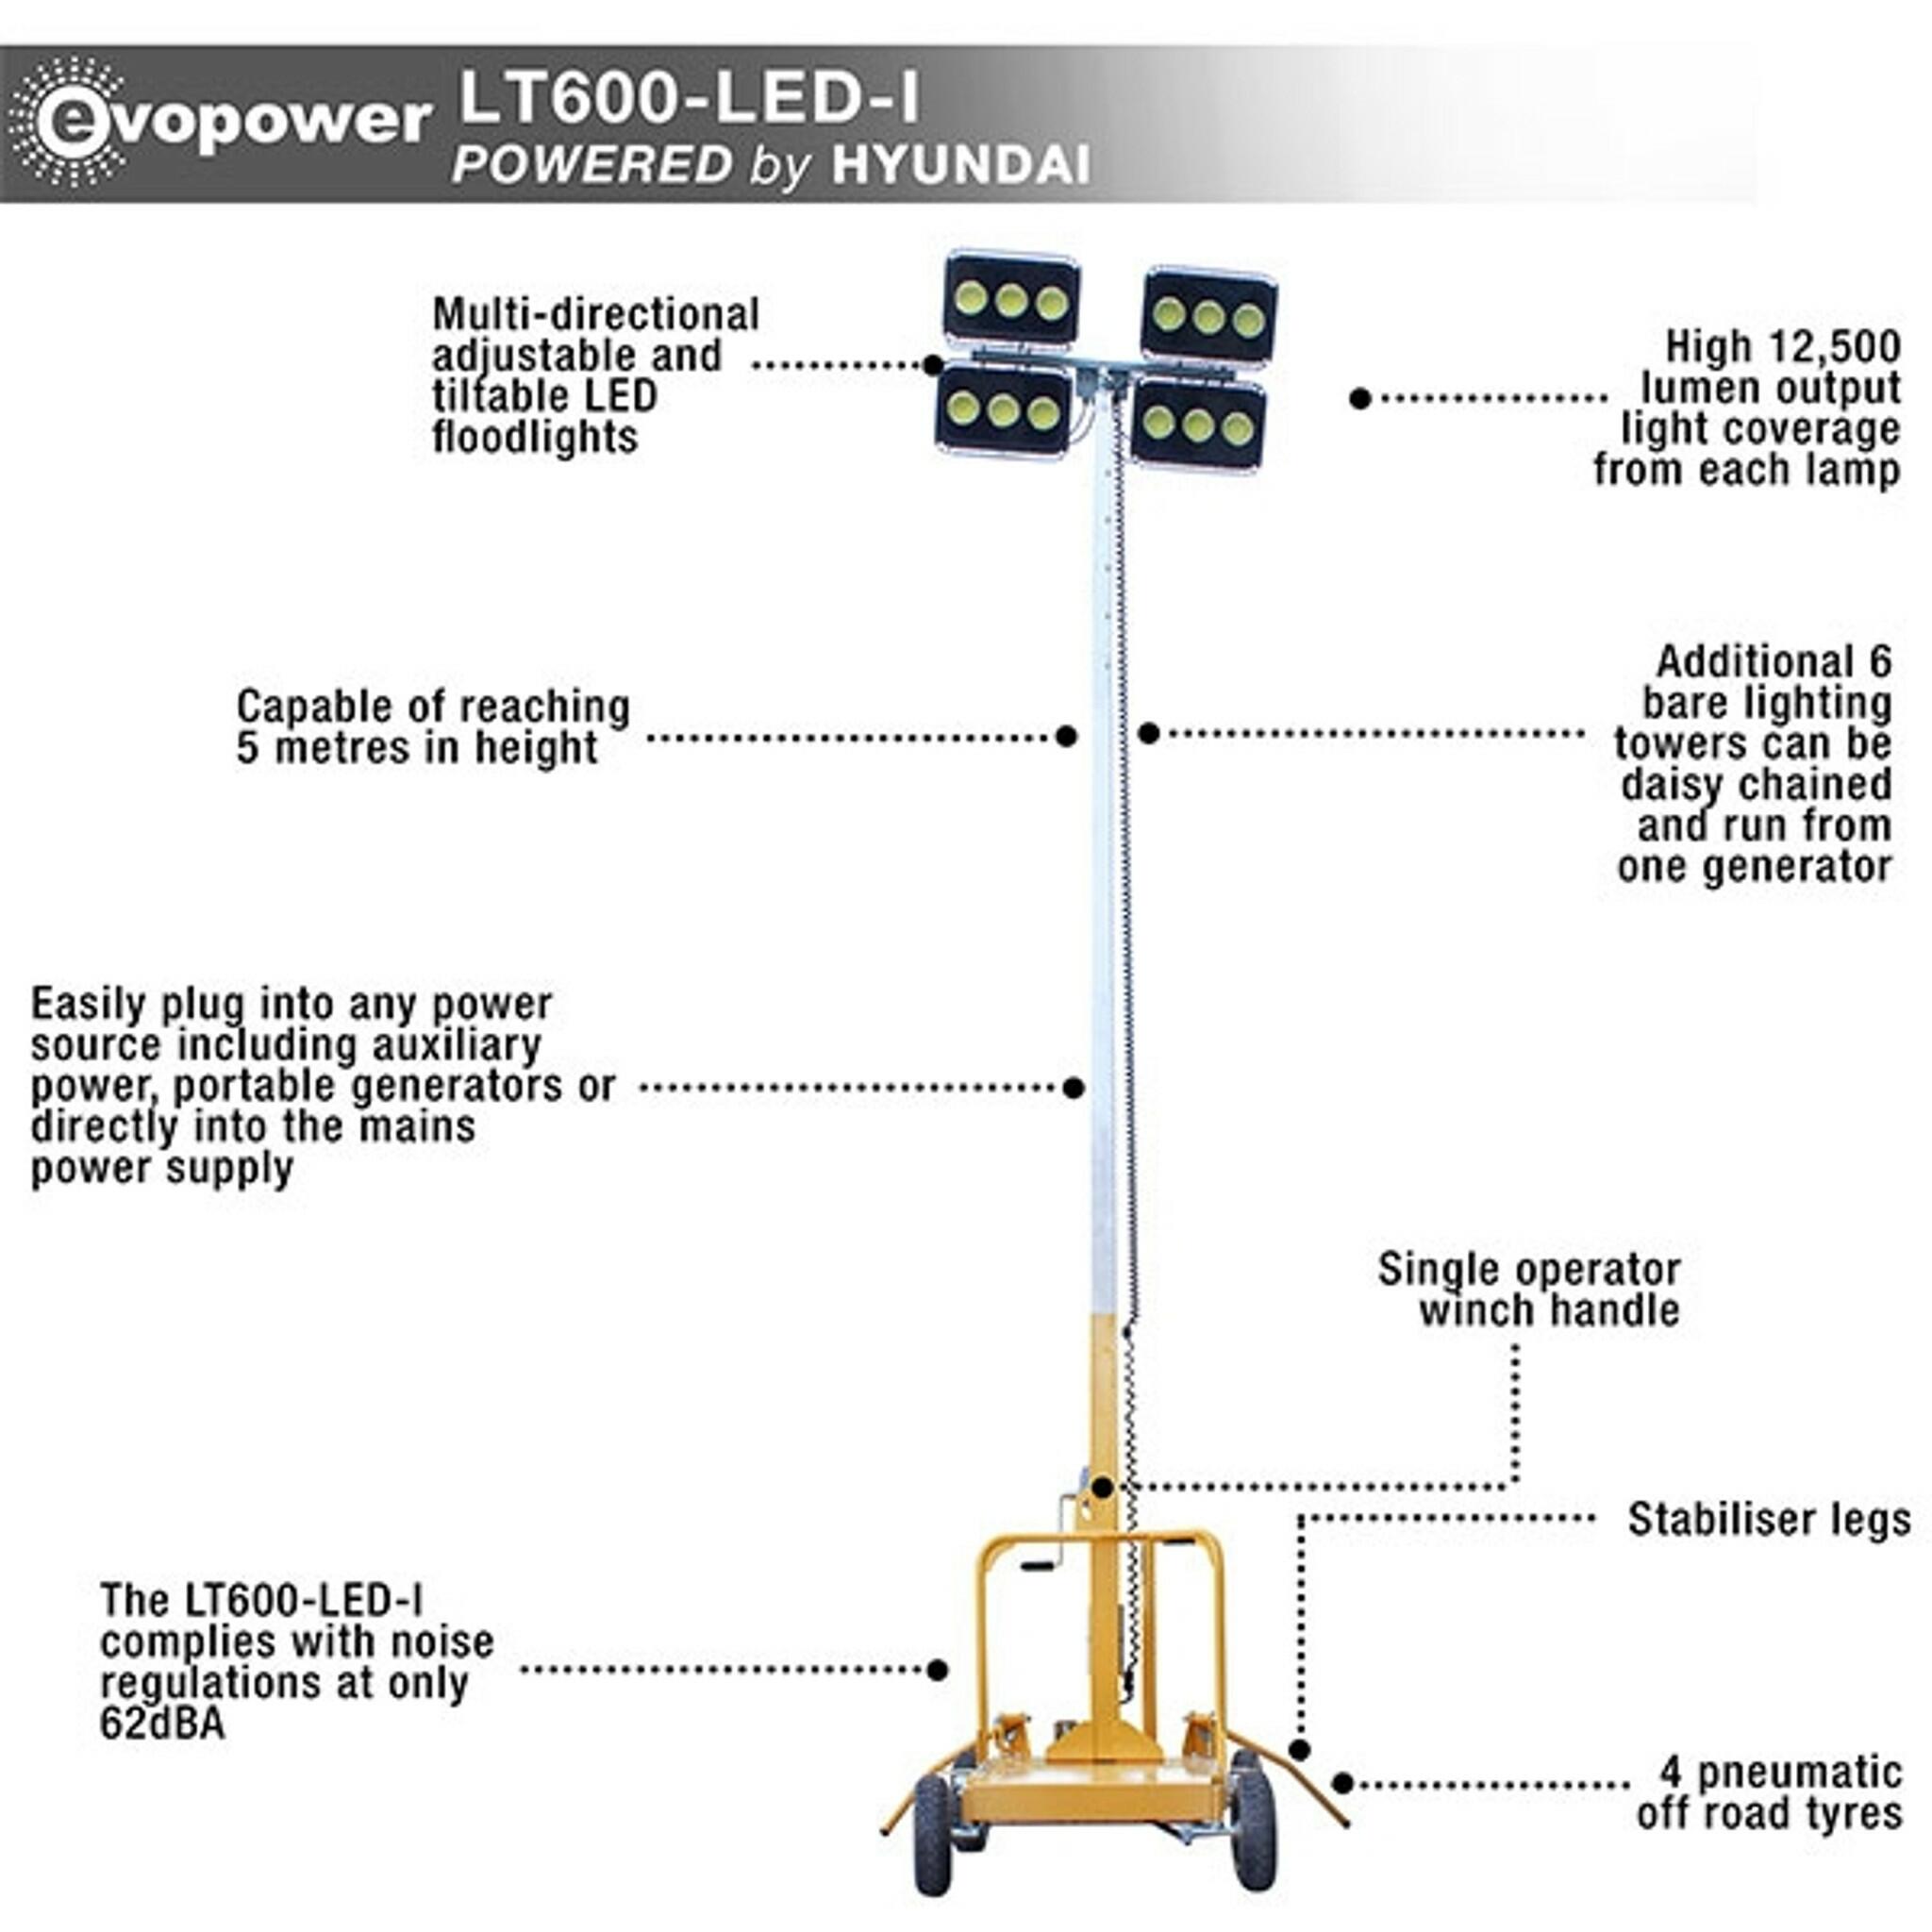 LED Lighting tower features